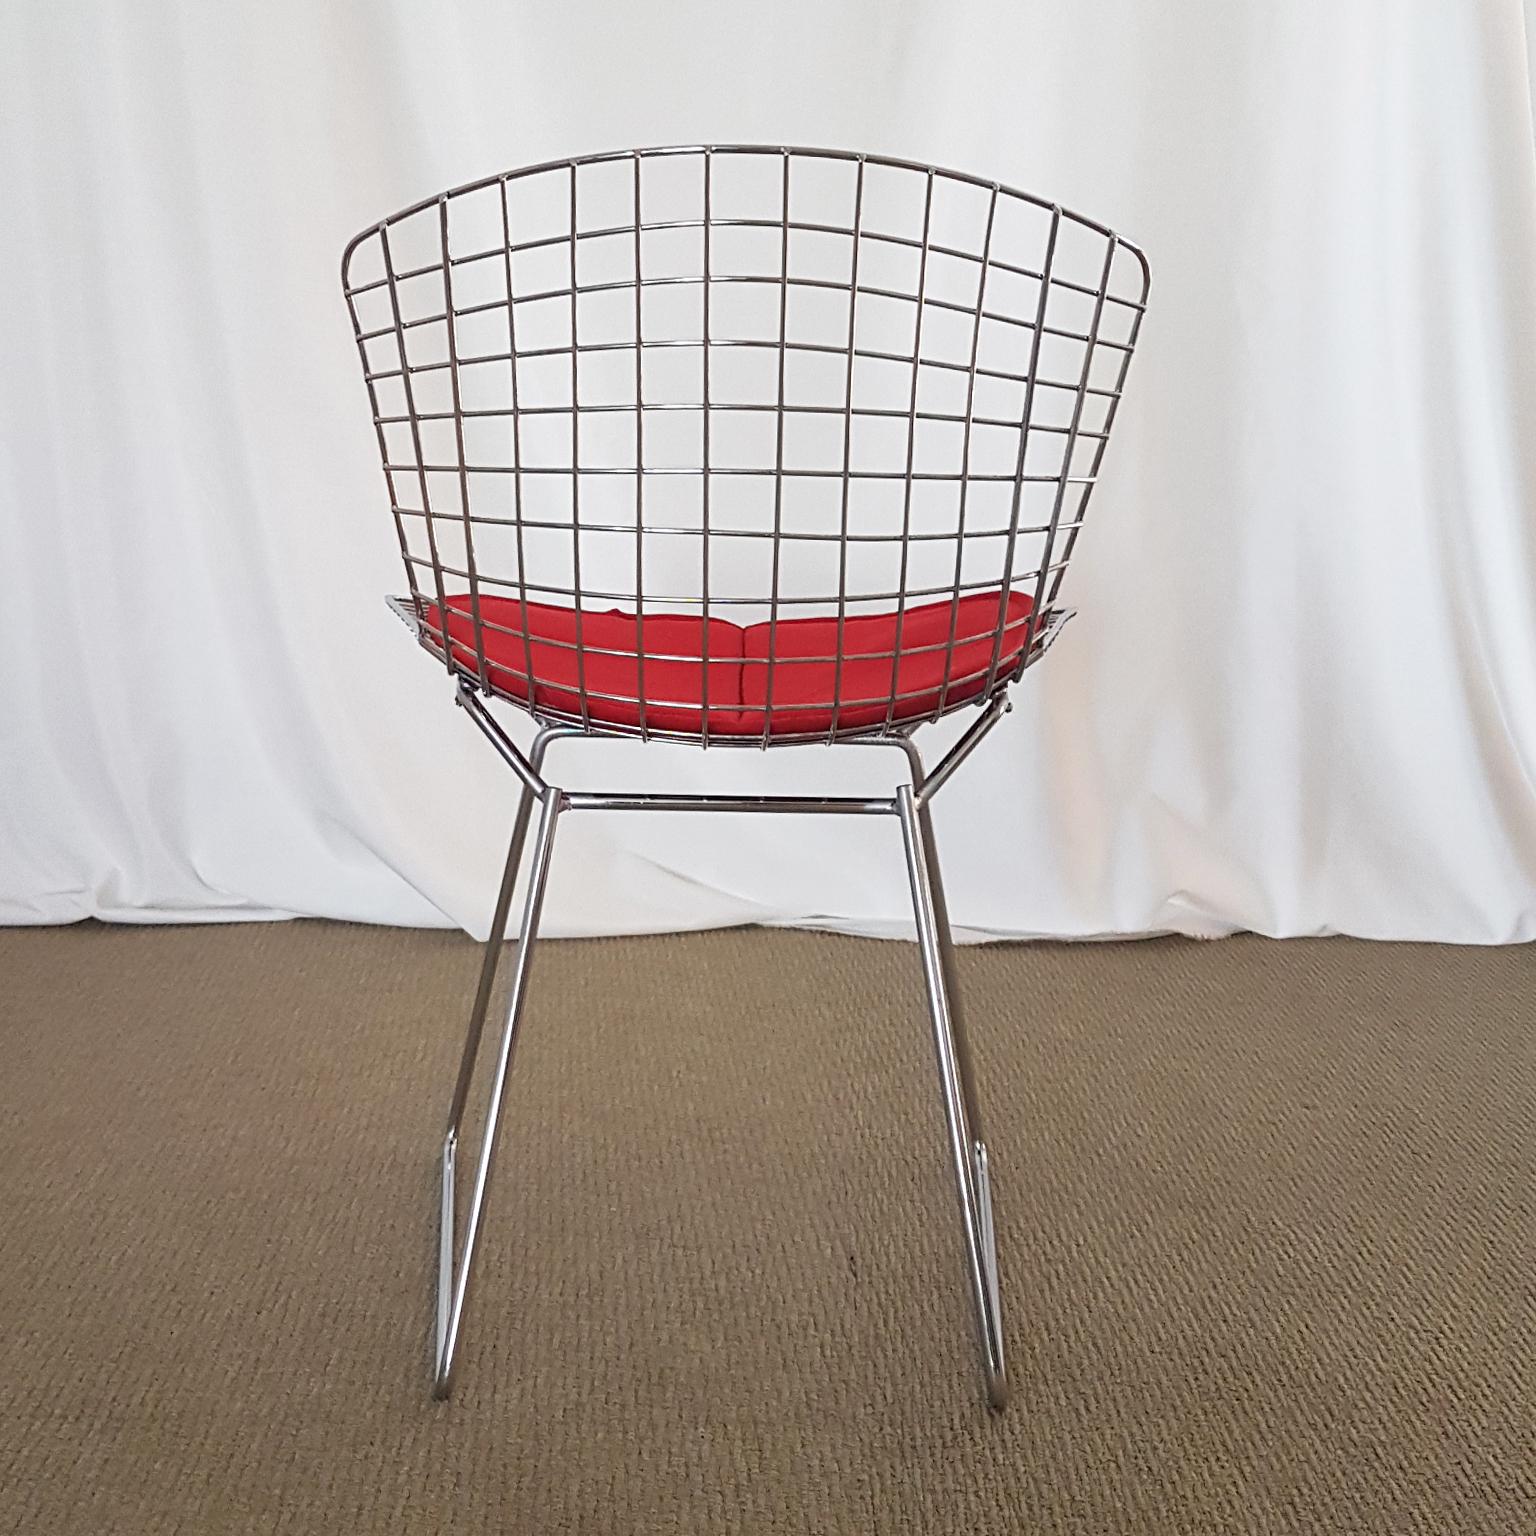 Late 20th Century Harry Bertoia Italian Steel Wire Side Chair with Red Cushion, Mid-Century Modern For Sale